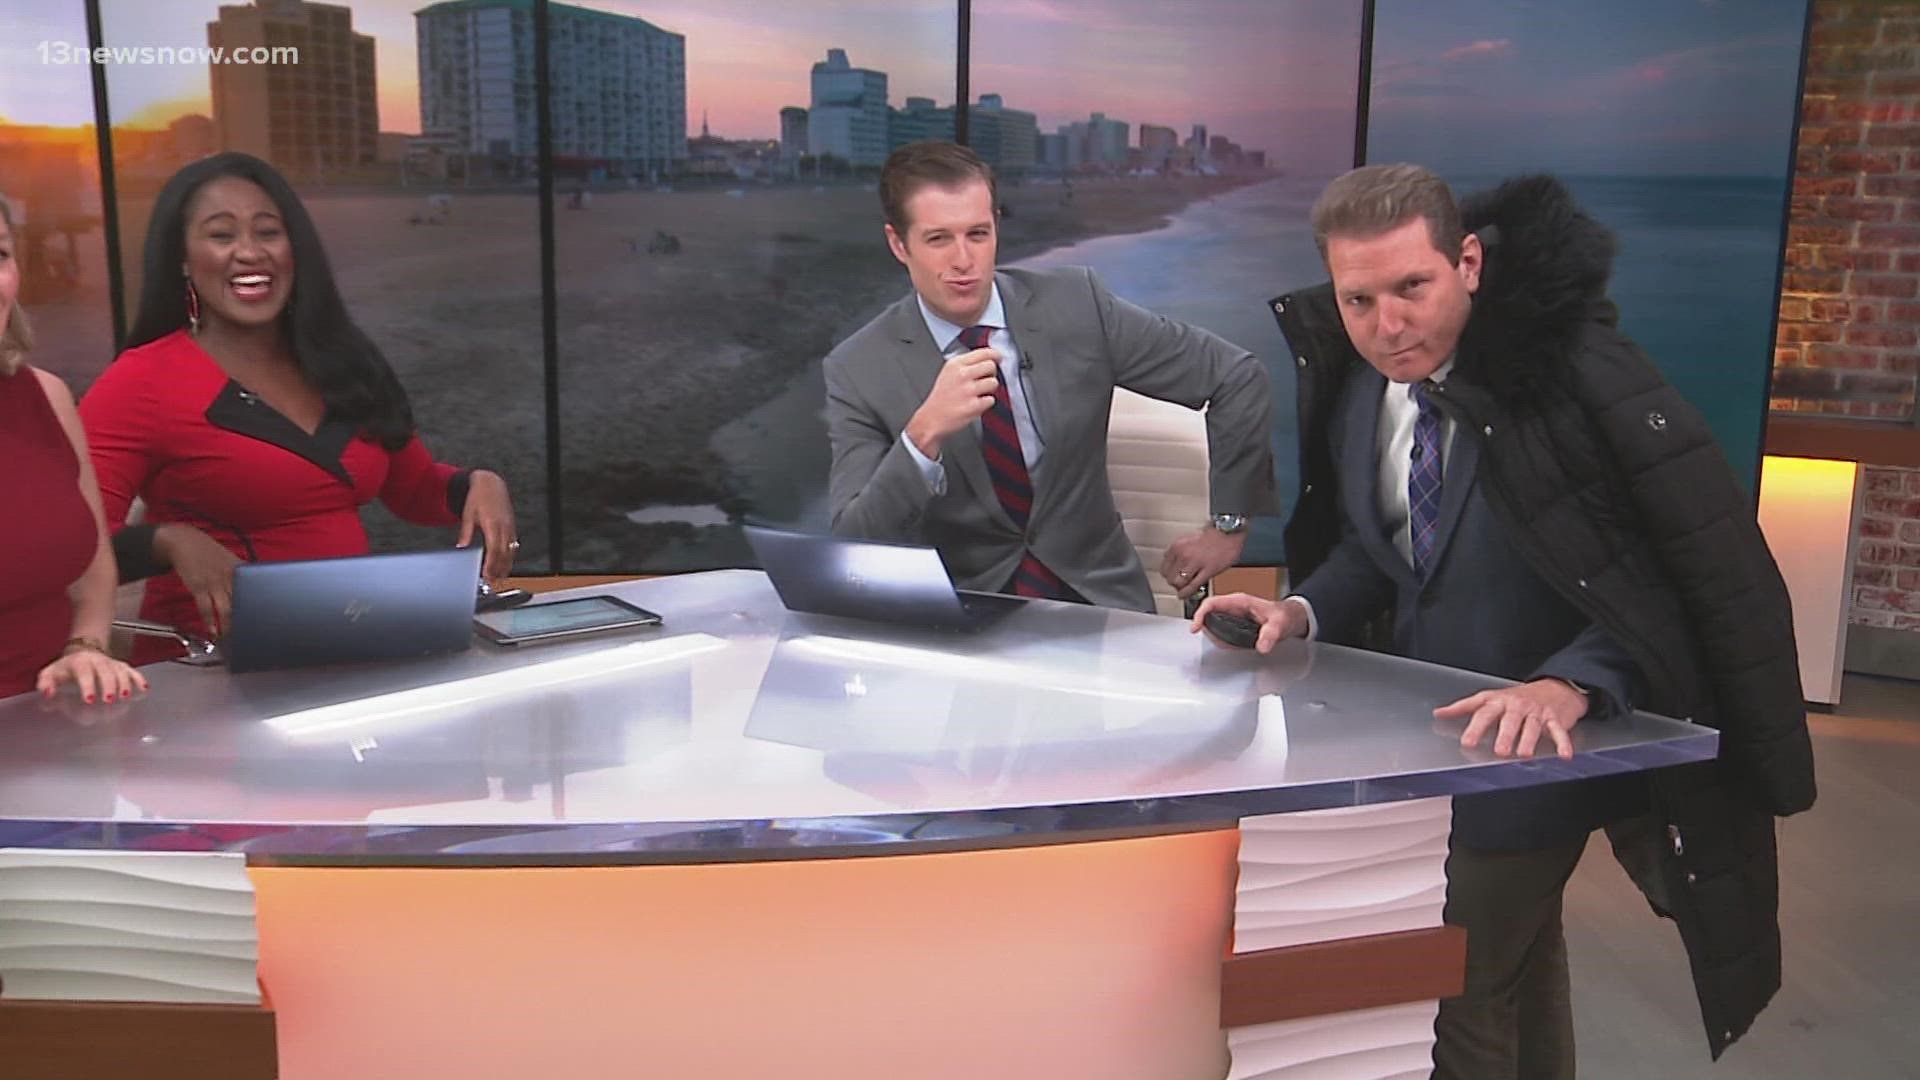 Discussions about winter coats get heated on Daybreak.